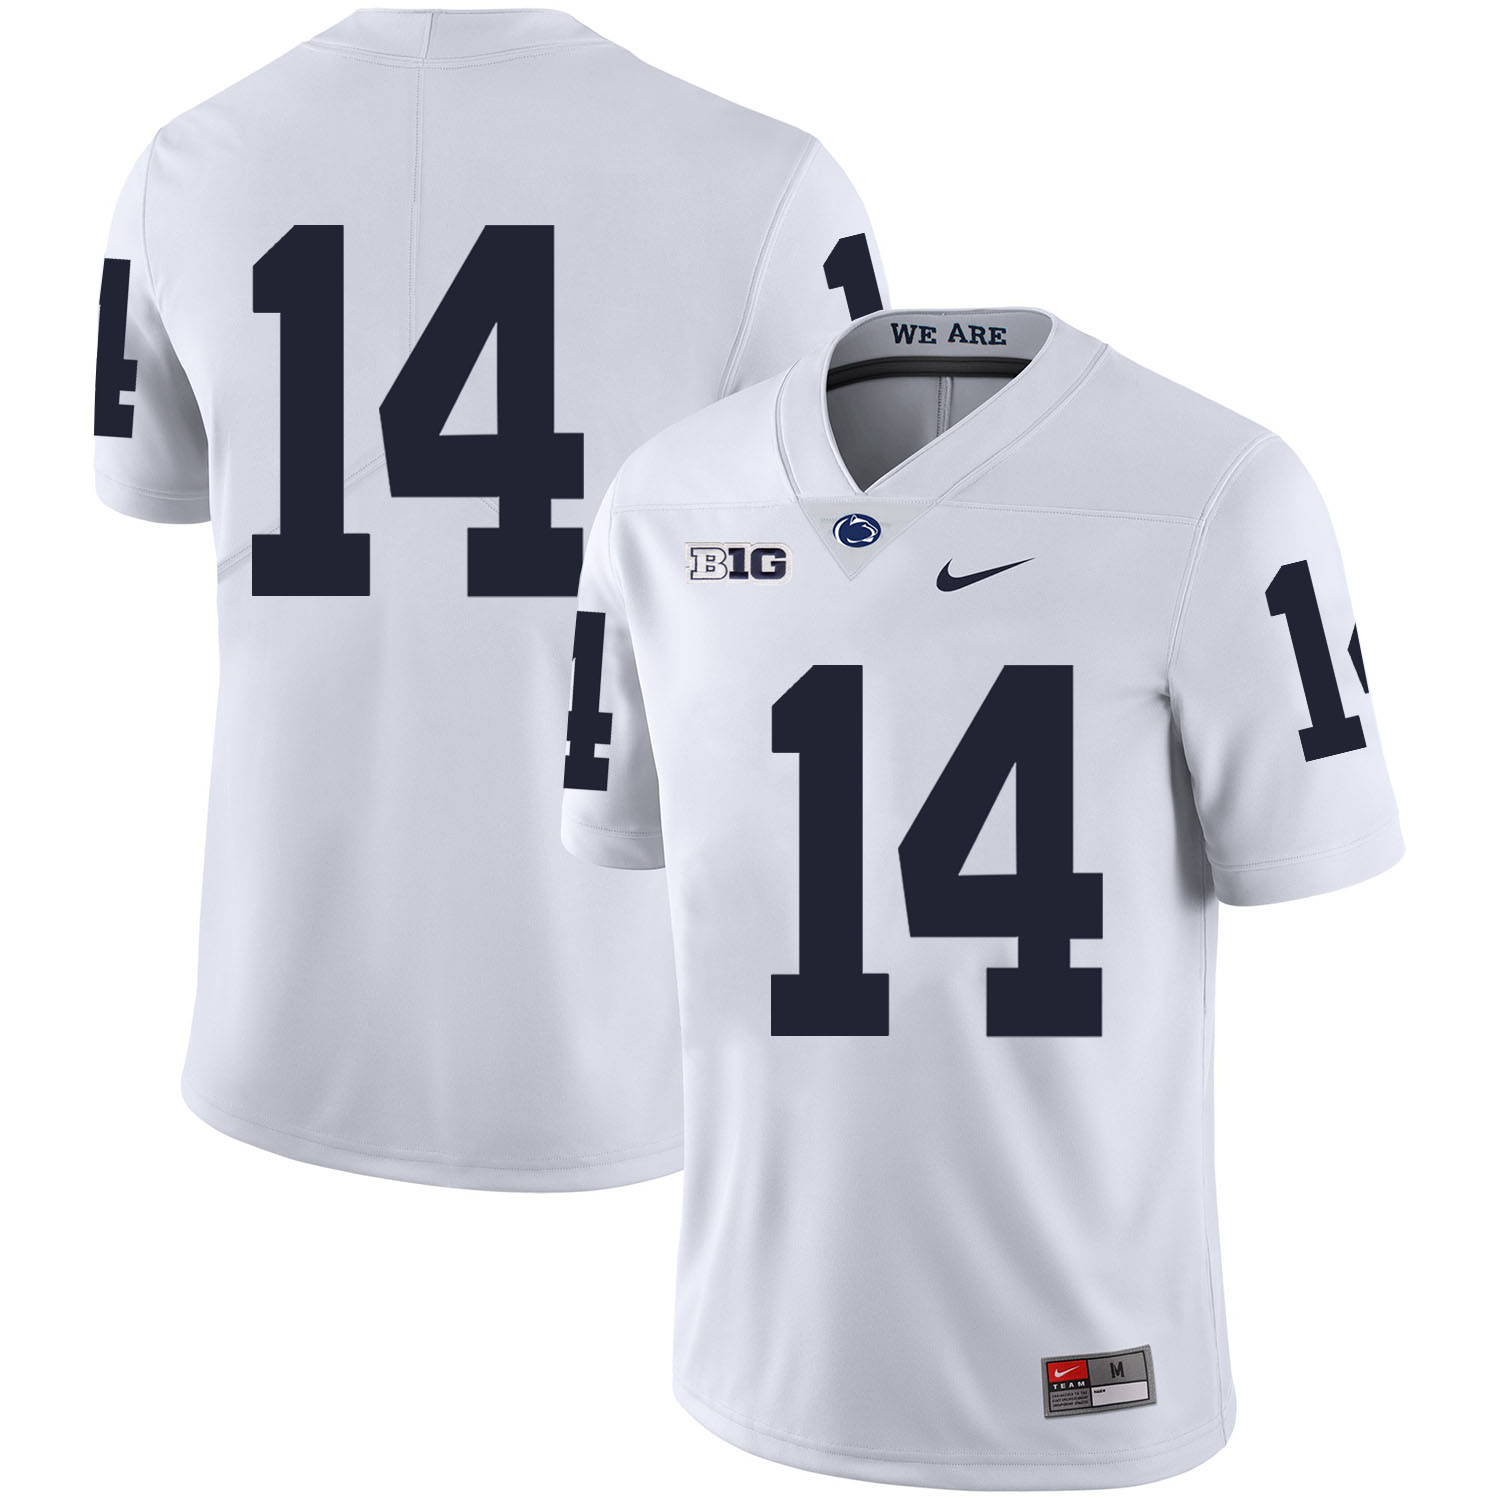 Penn State Nittany Lions 14 Christian Hackenberg White Nike College Football Jersey